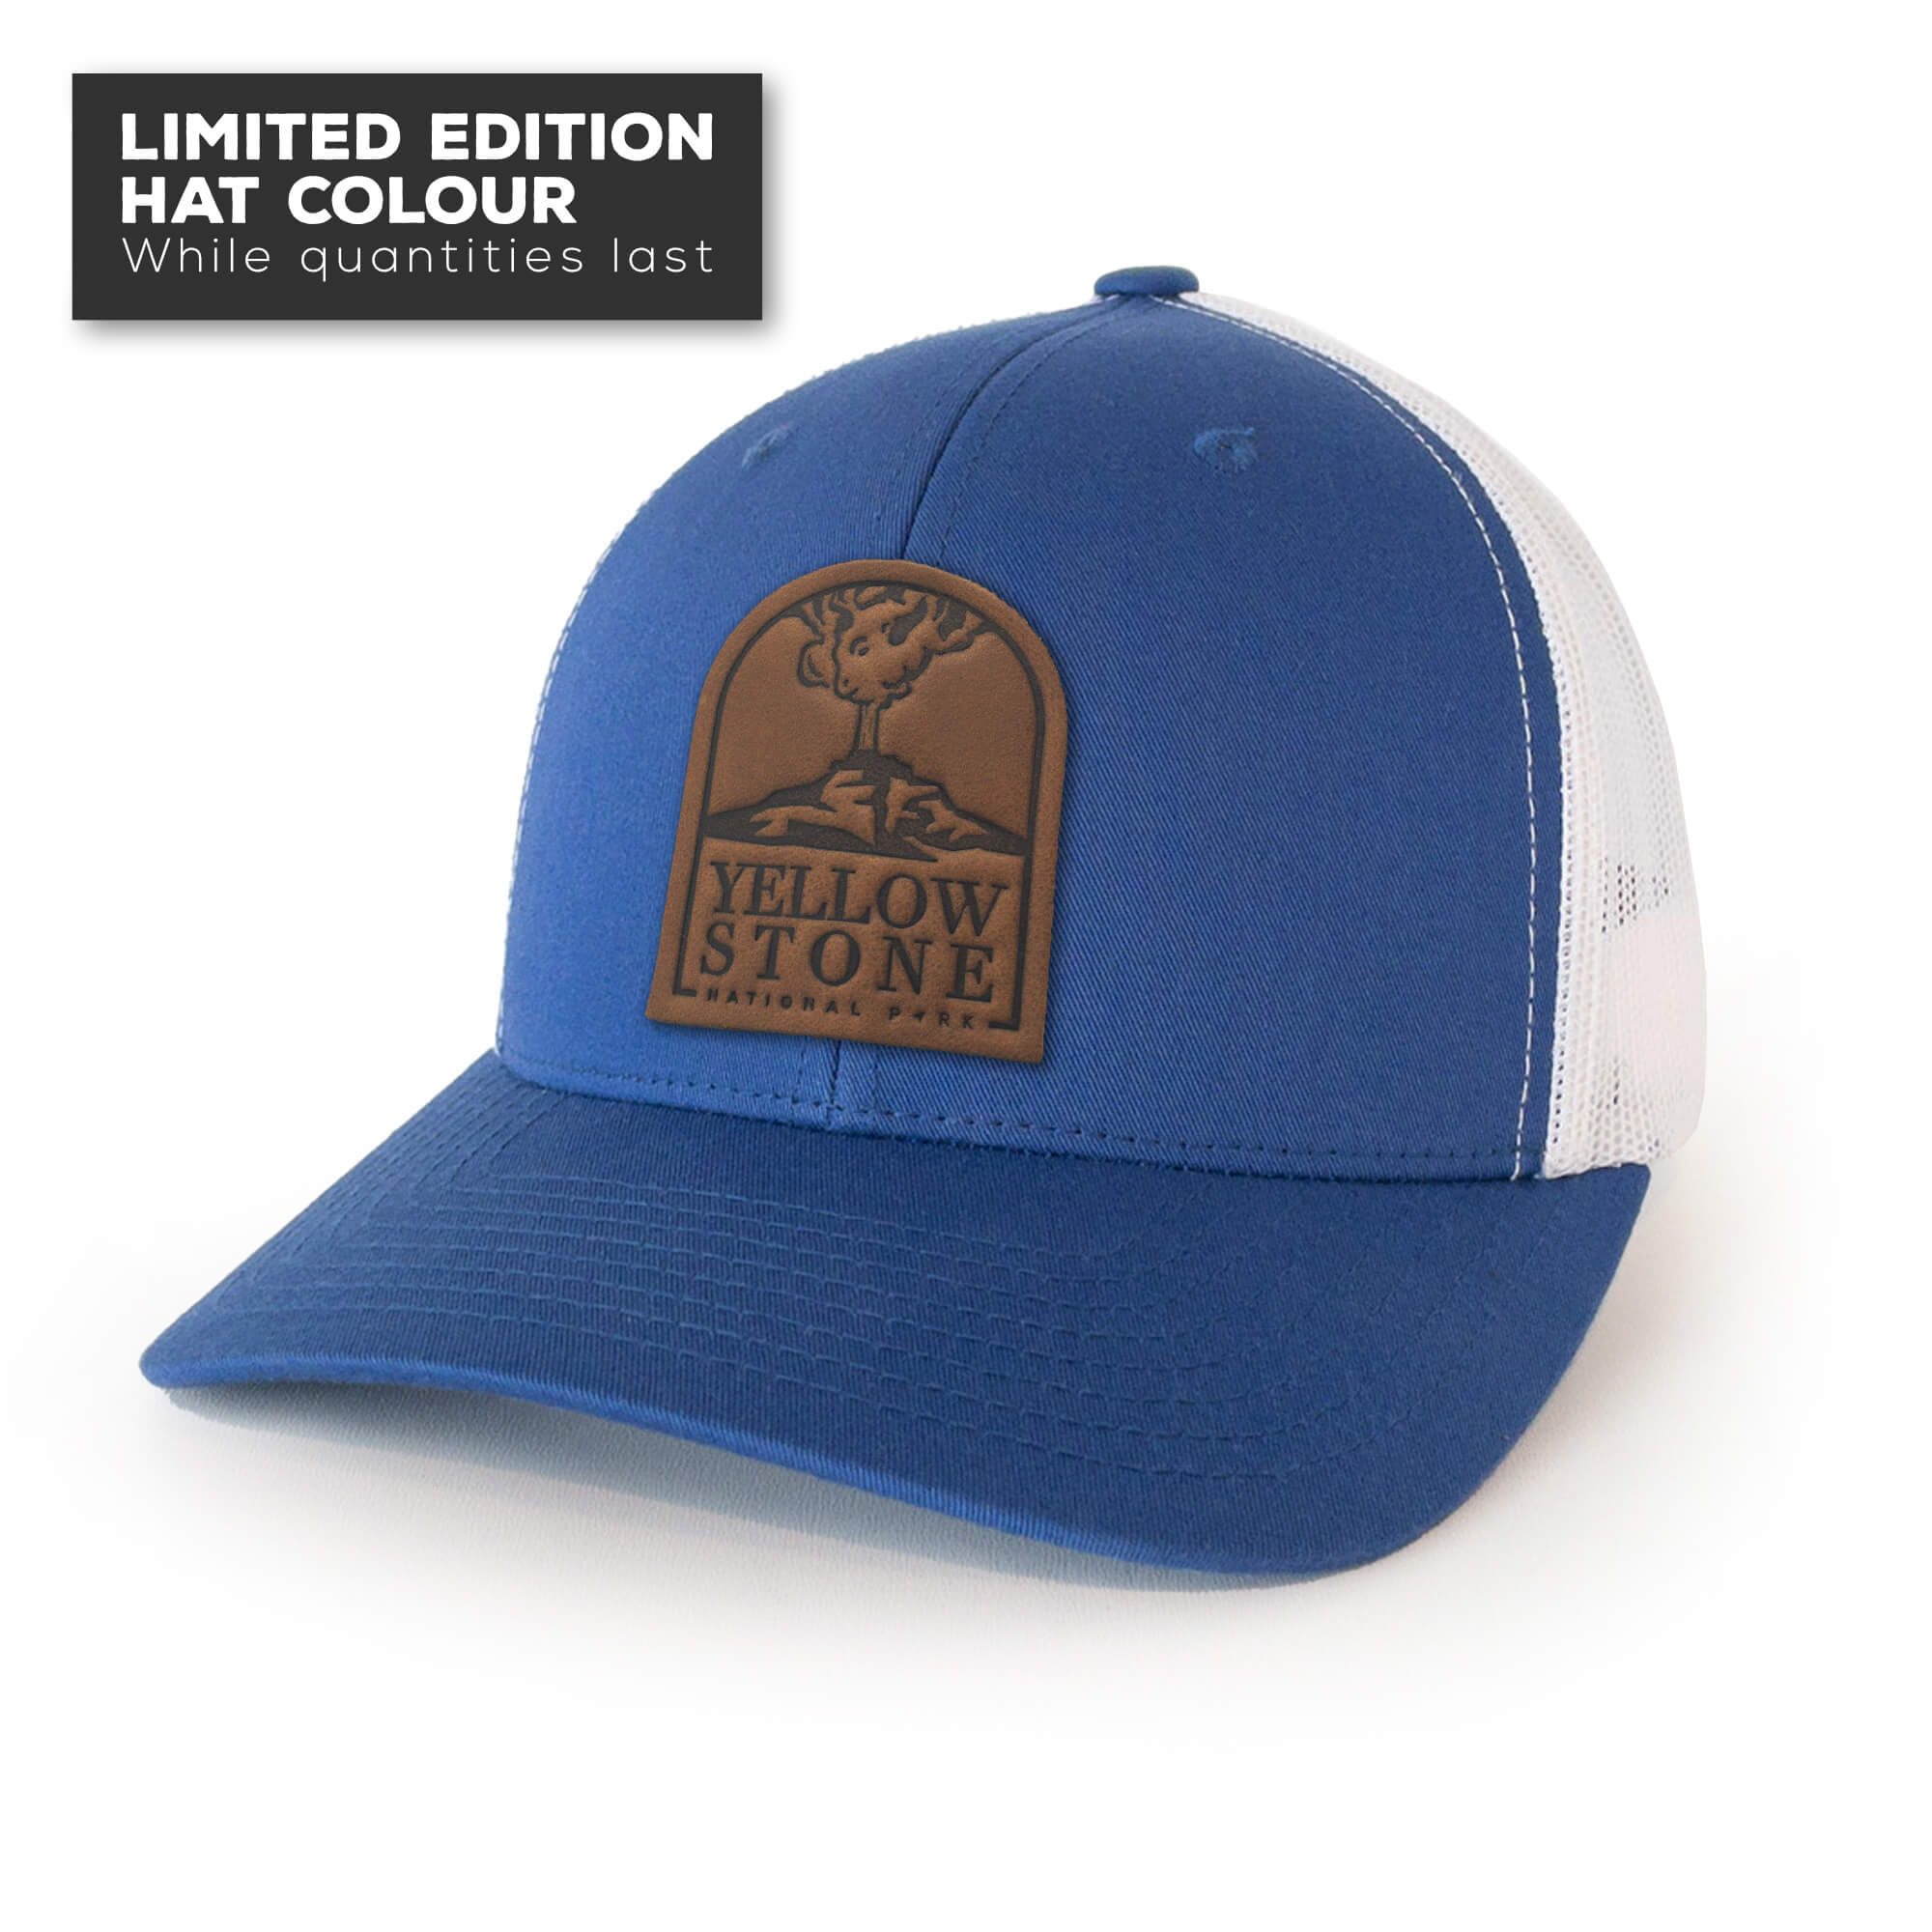 Royal Blue trucker hat with full-grain leather patch of Yellowstone